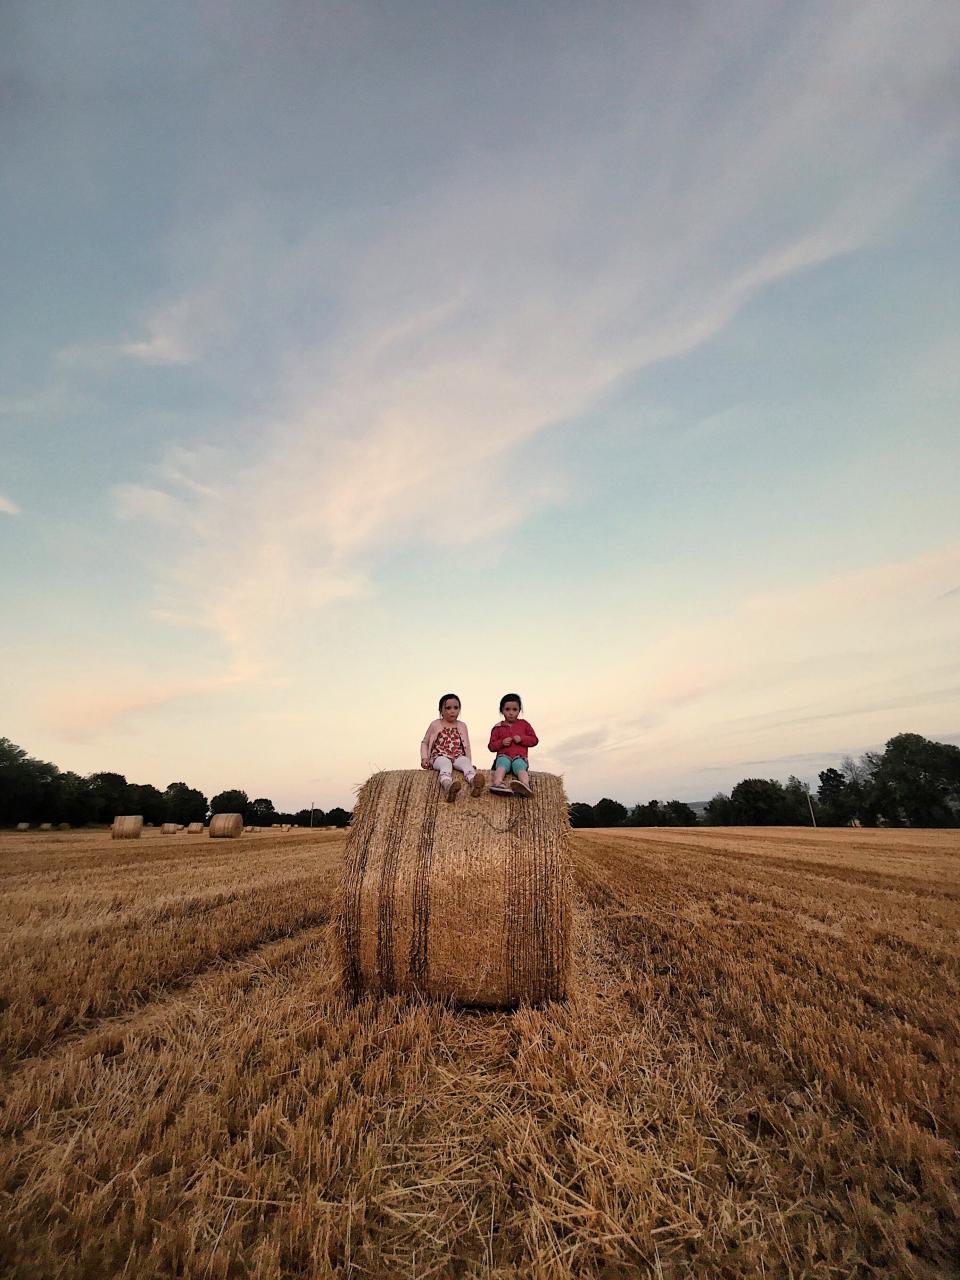 Third Place<br />"Twins"<br />Fermoy, Cork, Ireland<br />Shot on iPhone 7 Plus